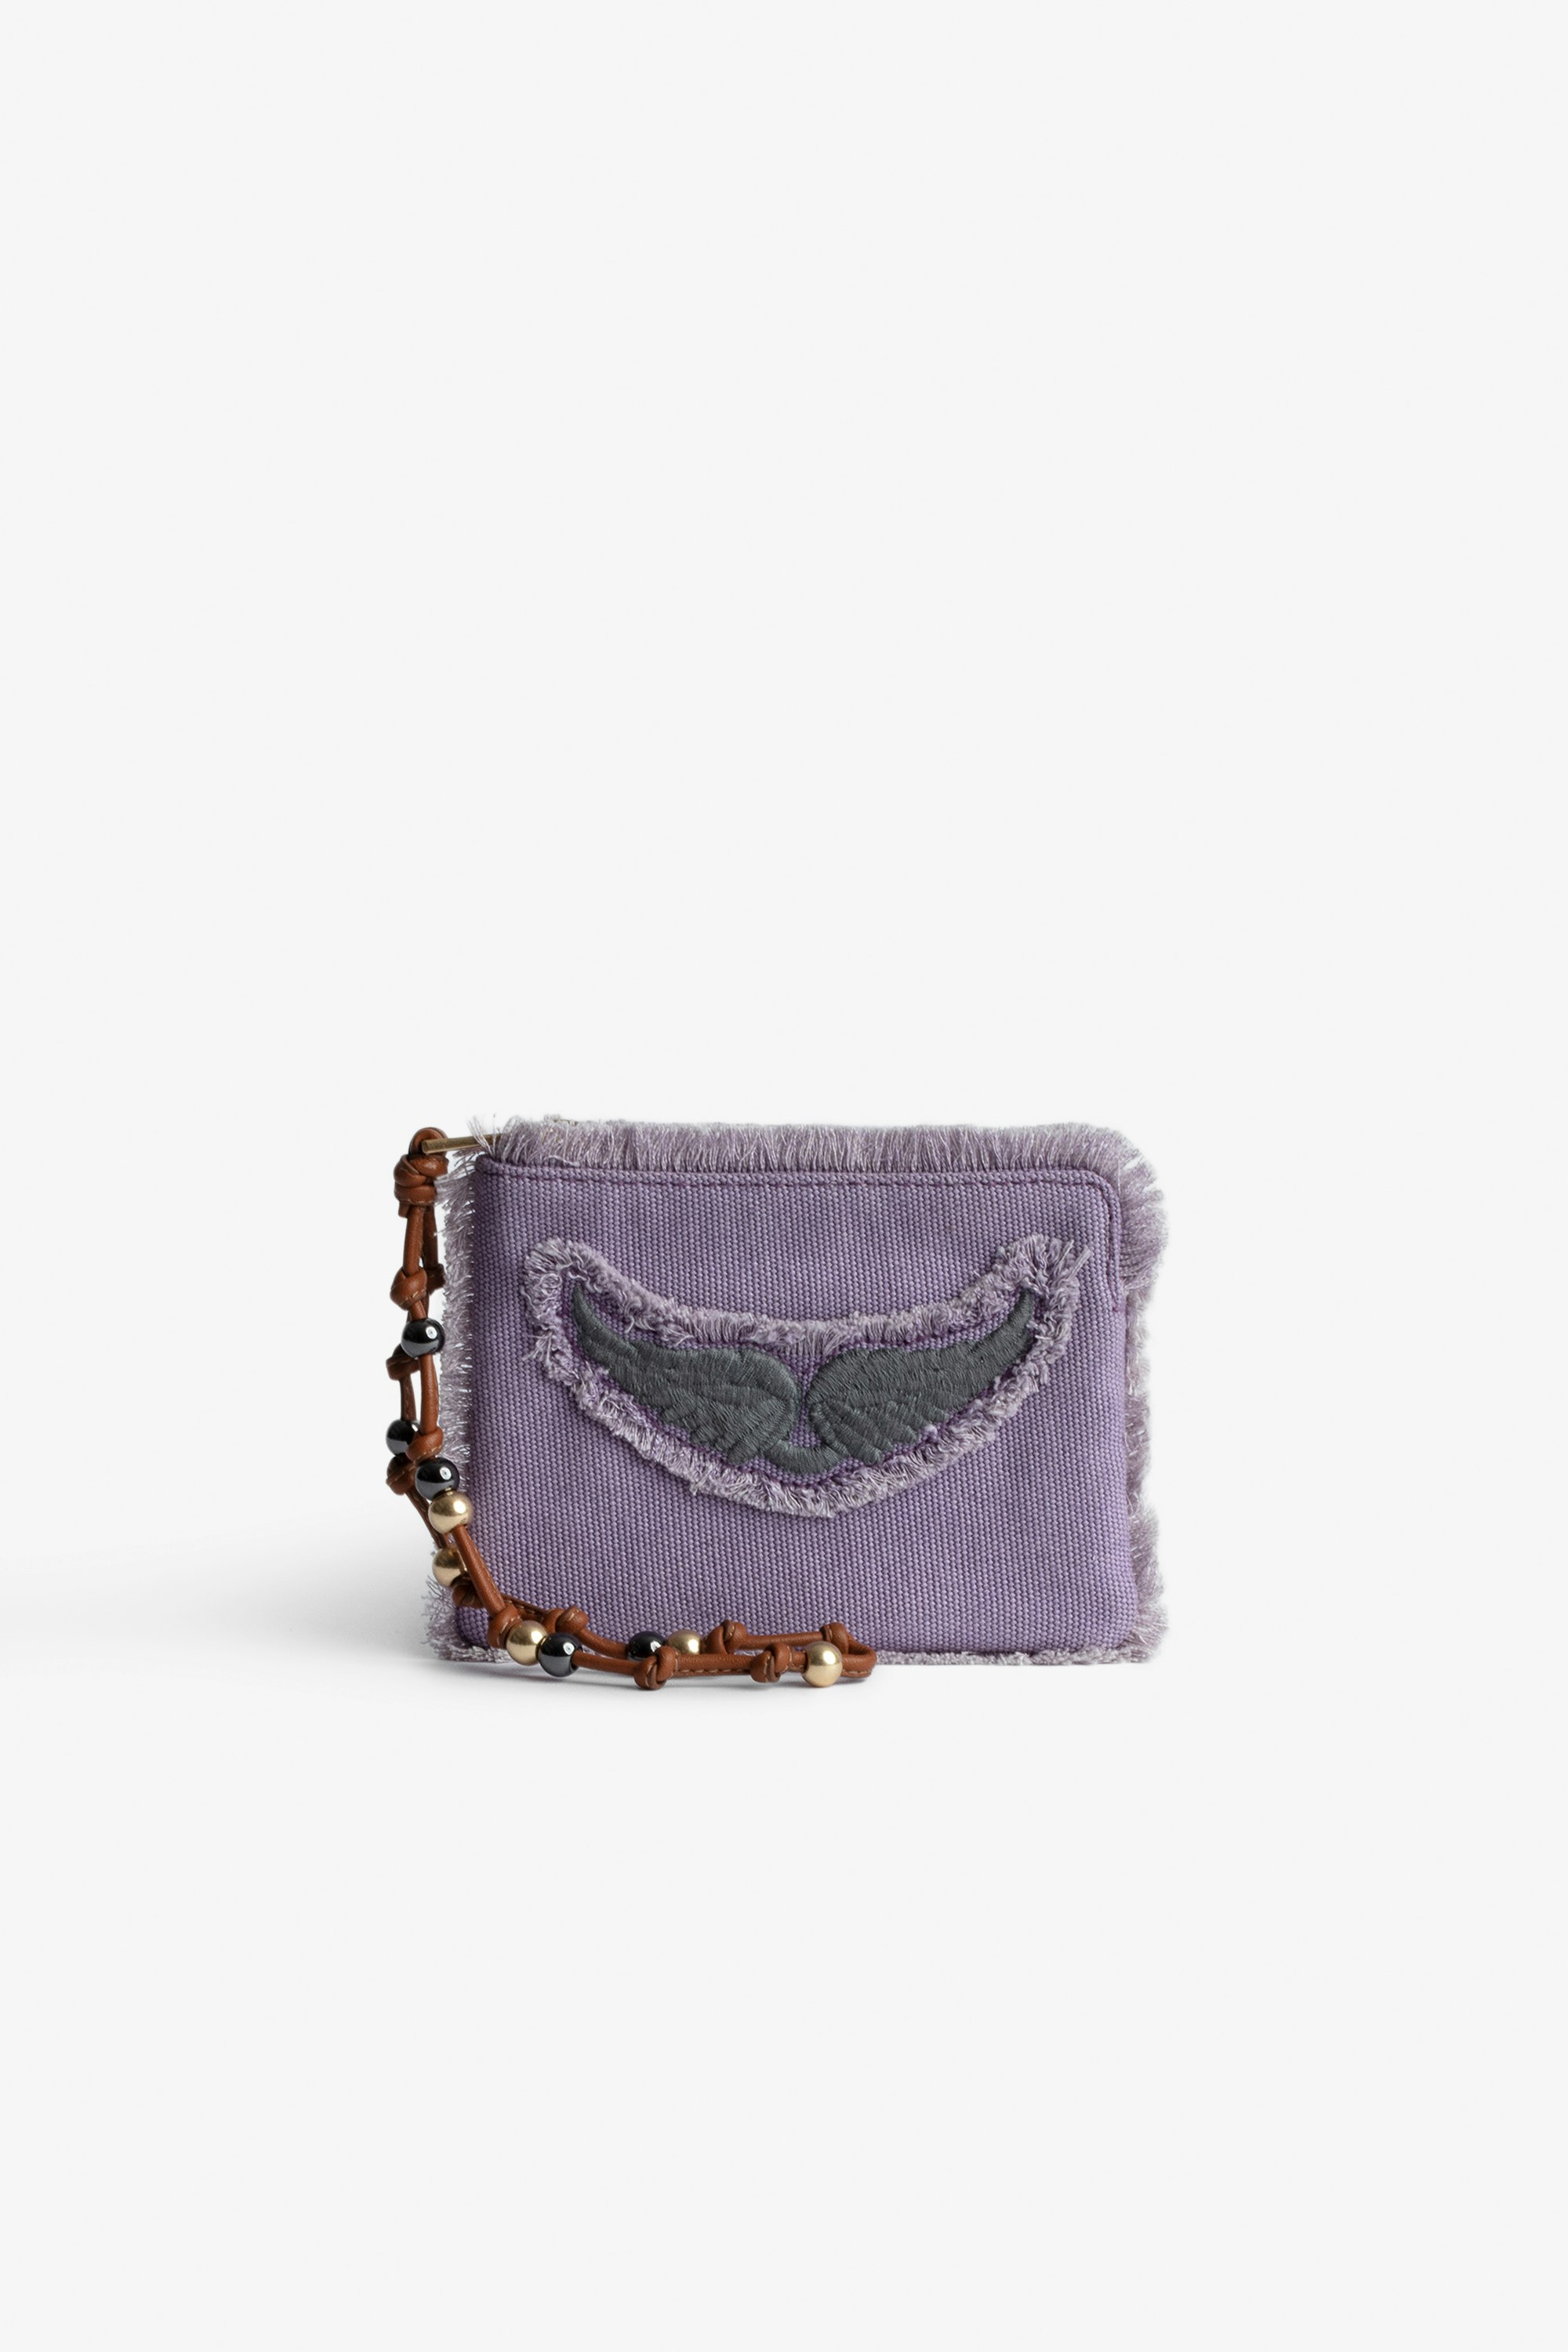 Mini Uma Clutch Women's purple cotton clutch bag with fringing, wings patch and a beaded strap